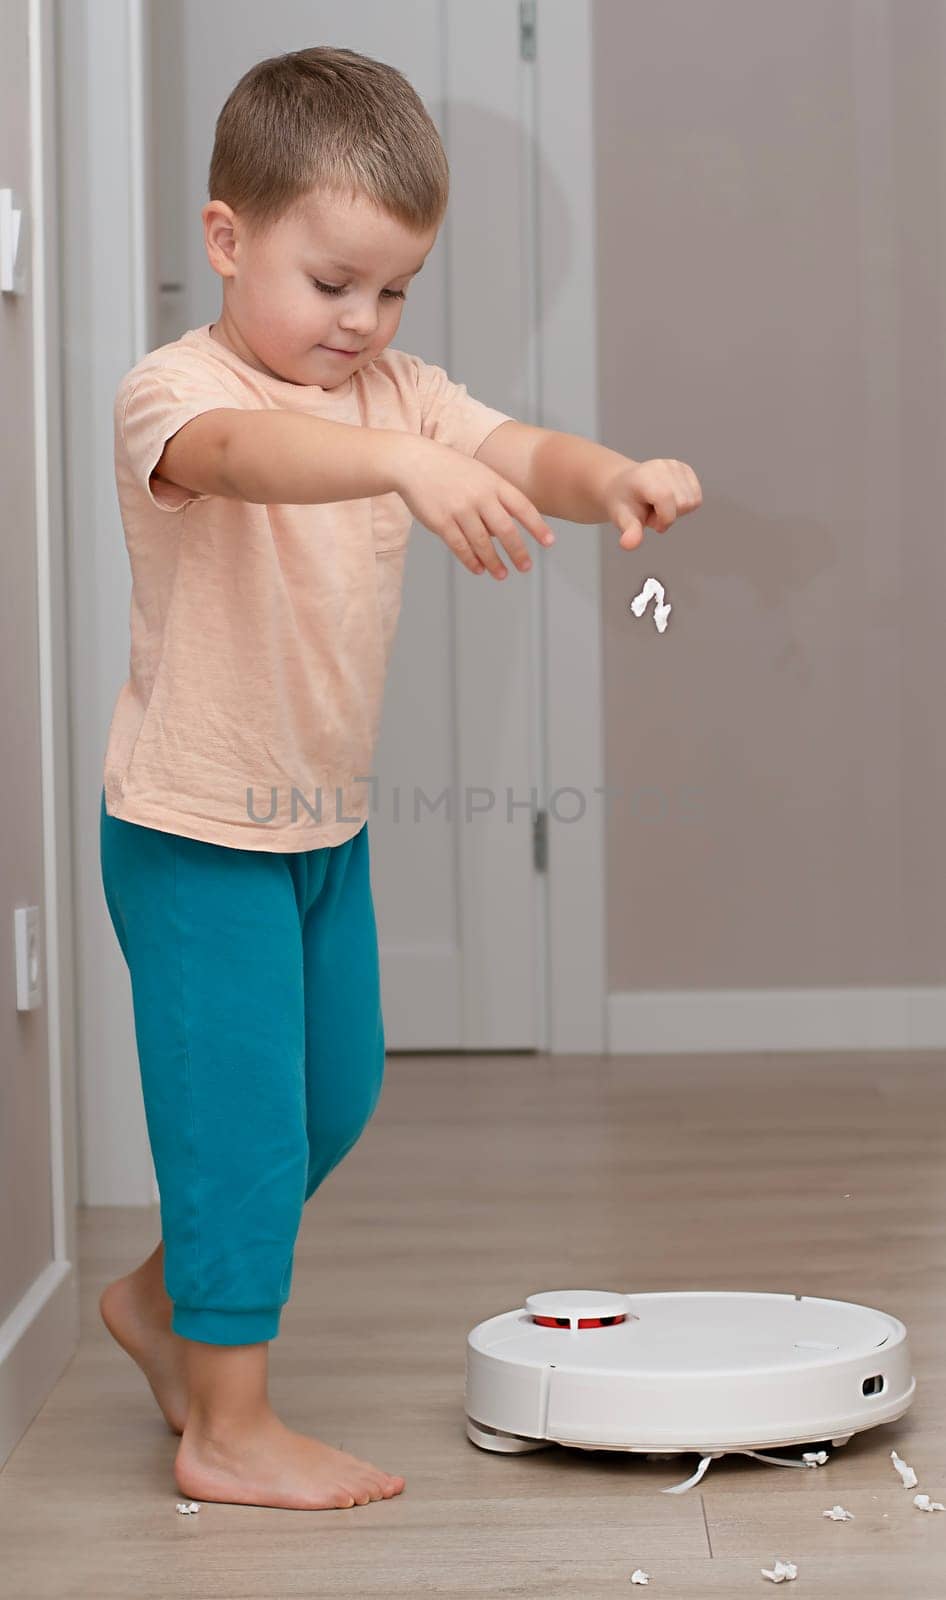 Cleaning concept. A small funny Caucasian boy, 4 years old, throws torn paper on the floor for cleaning by a white robot vacuum cleaner. Plays happily in the home interior. by ketlit